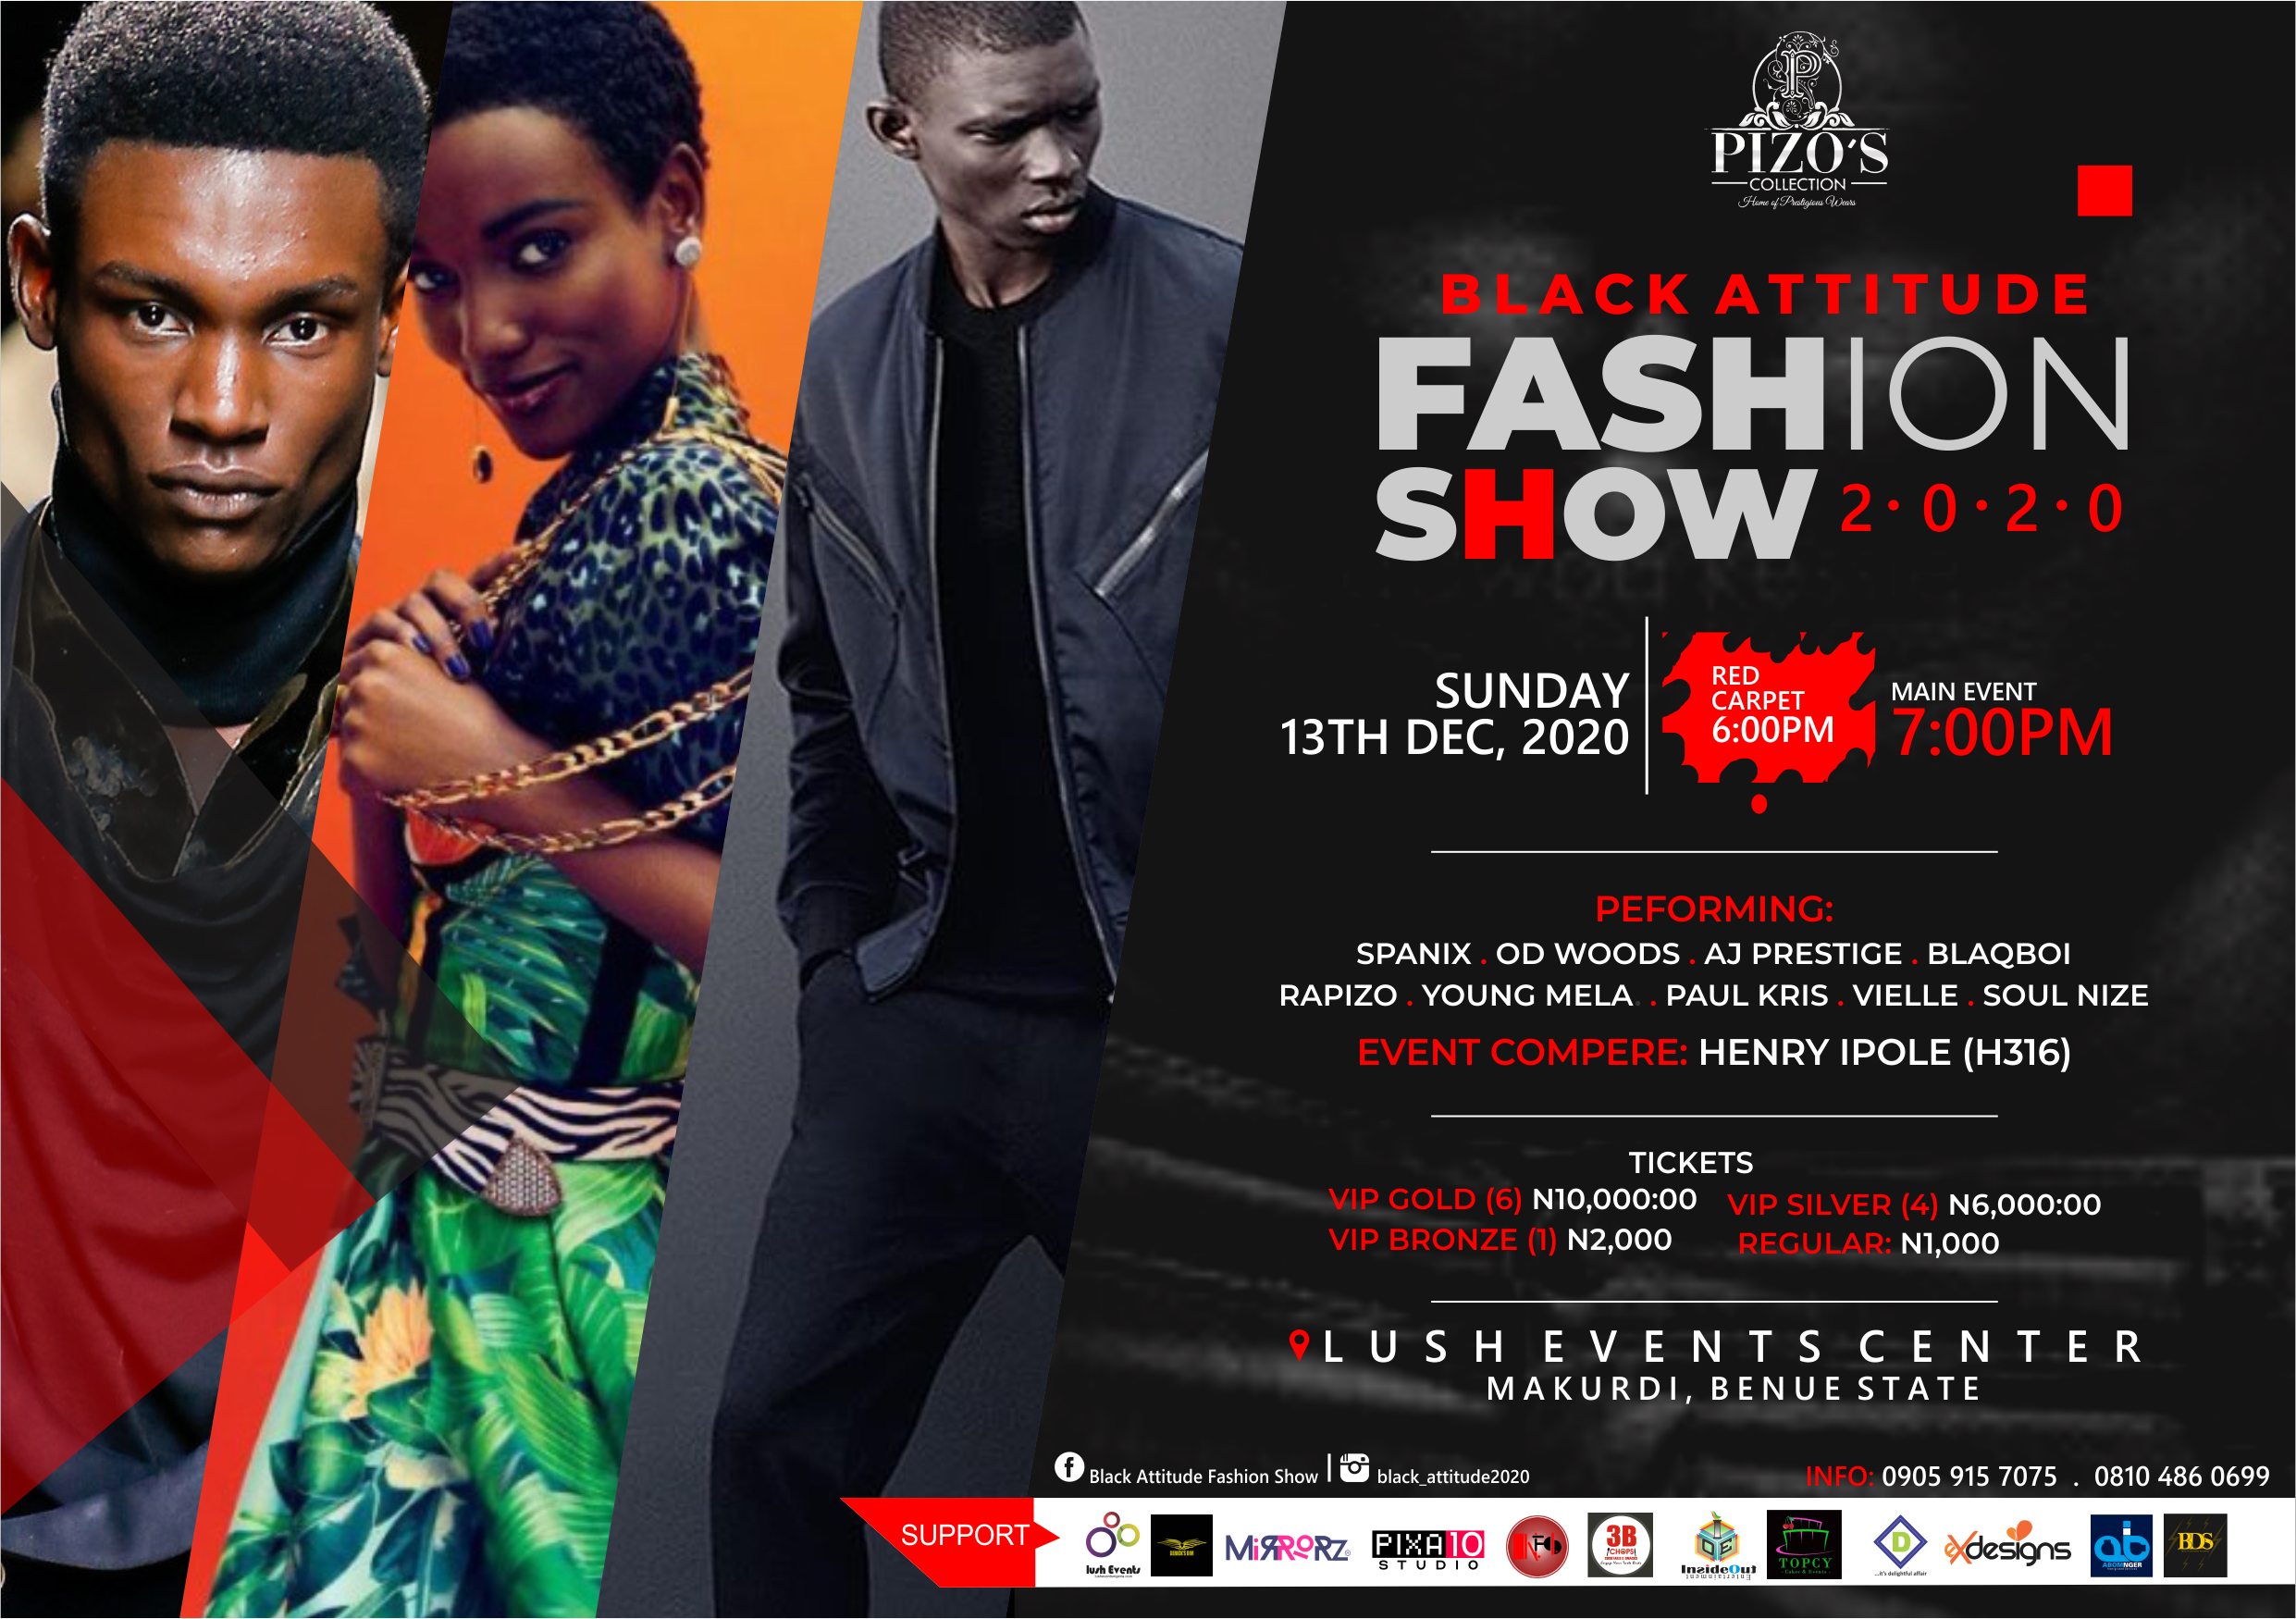 A DECEMBER FASHION EXPERIENCE FROM THE STABLES OF PIZOS COLLECTIONS COMES THE BLACK ATTITUDE FASHION SHOW